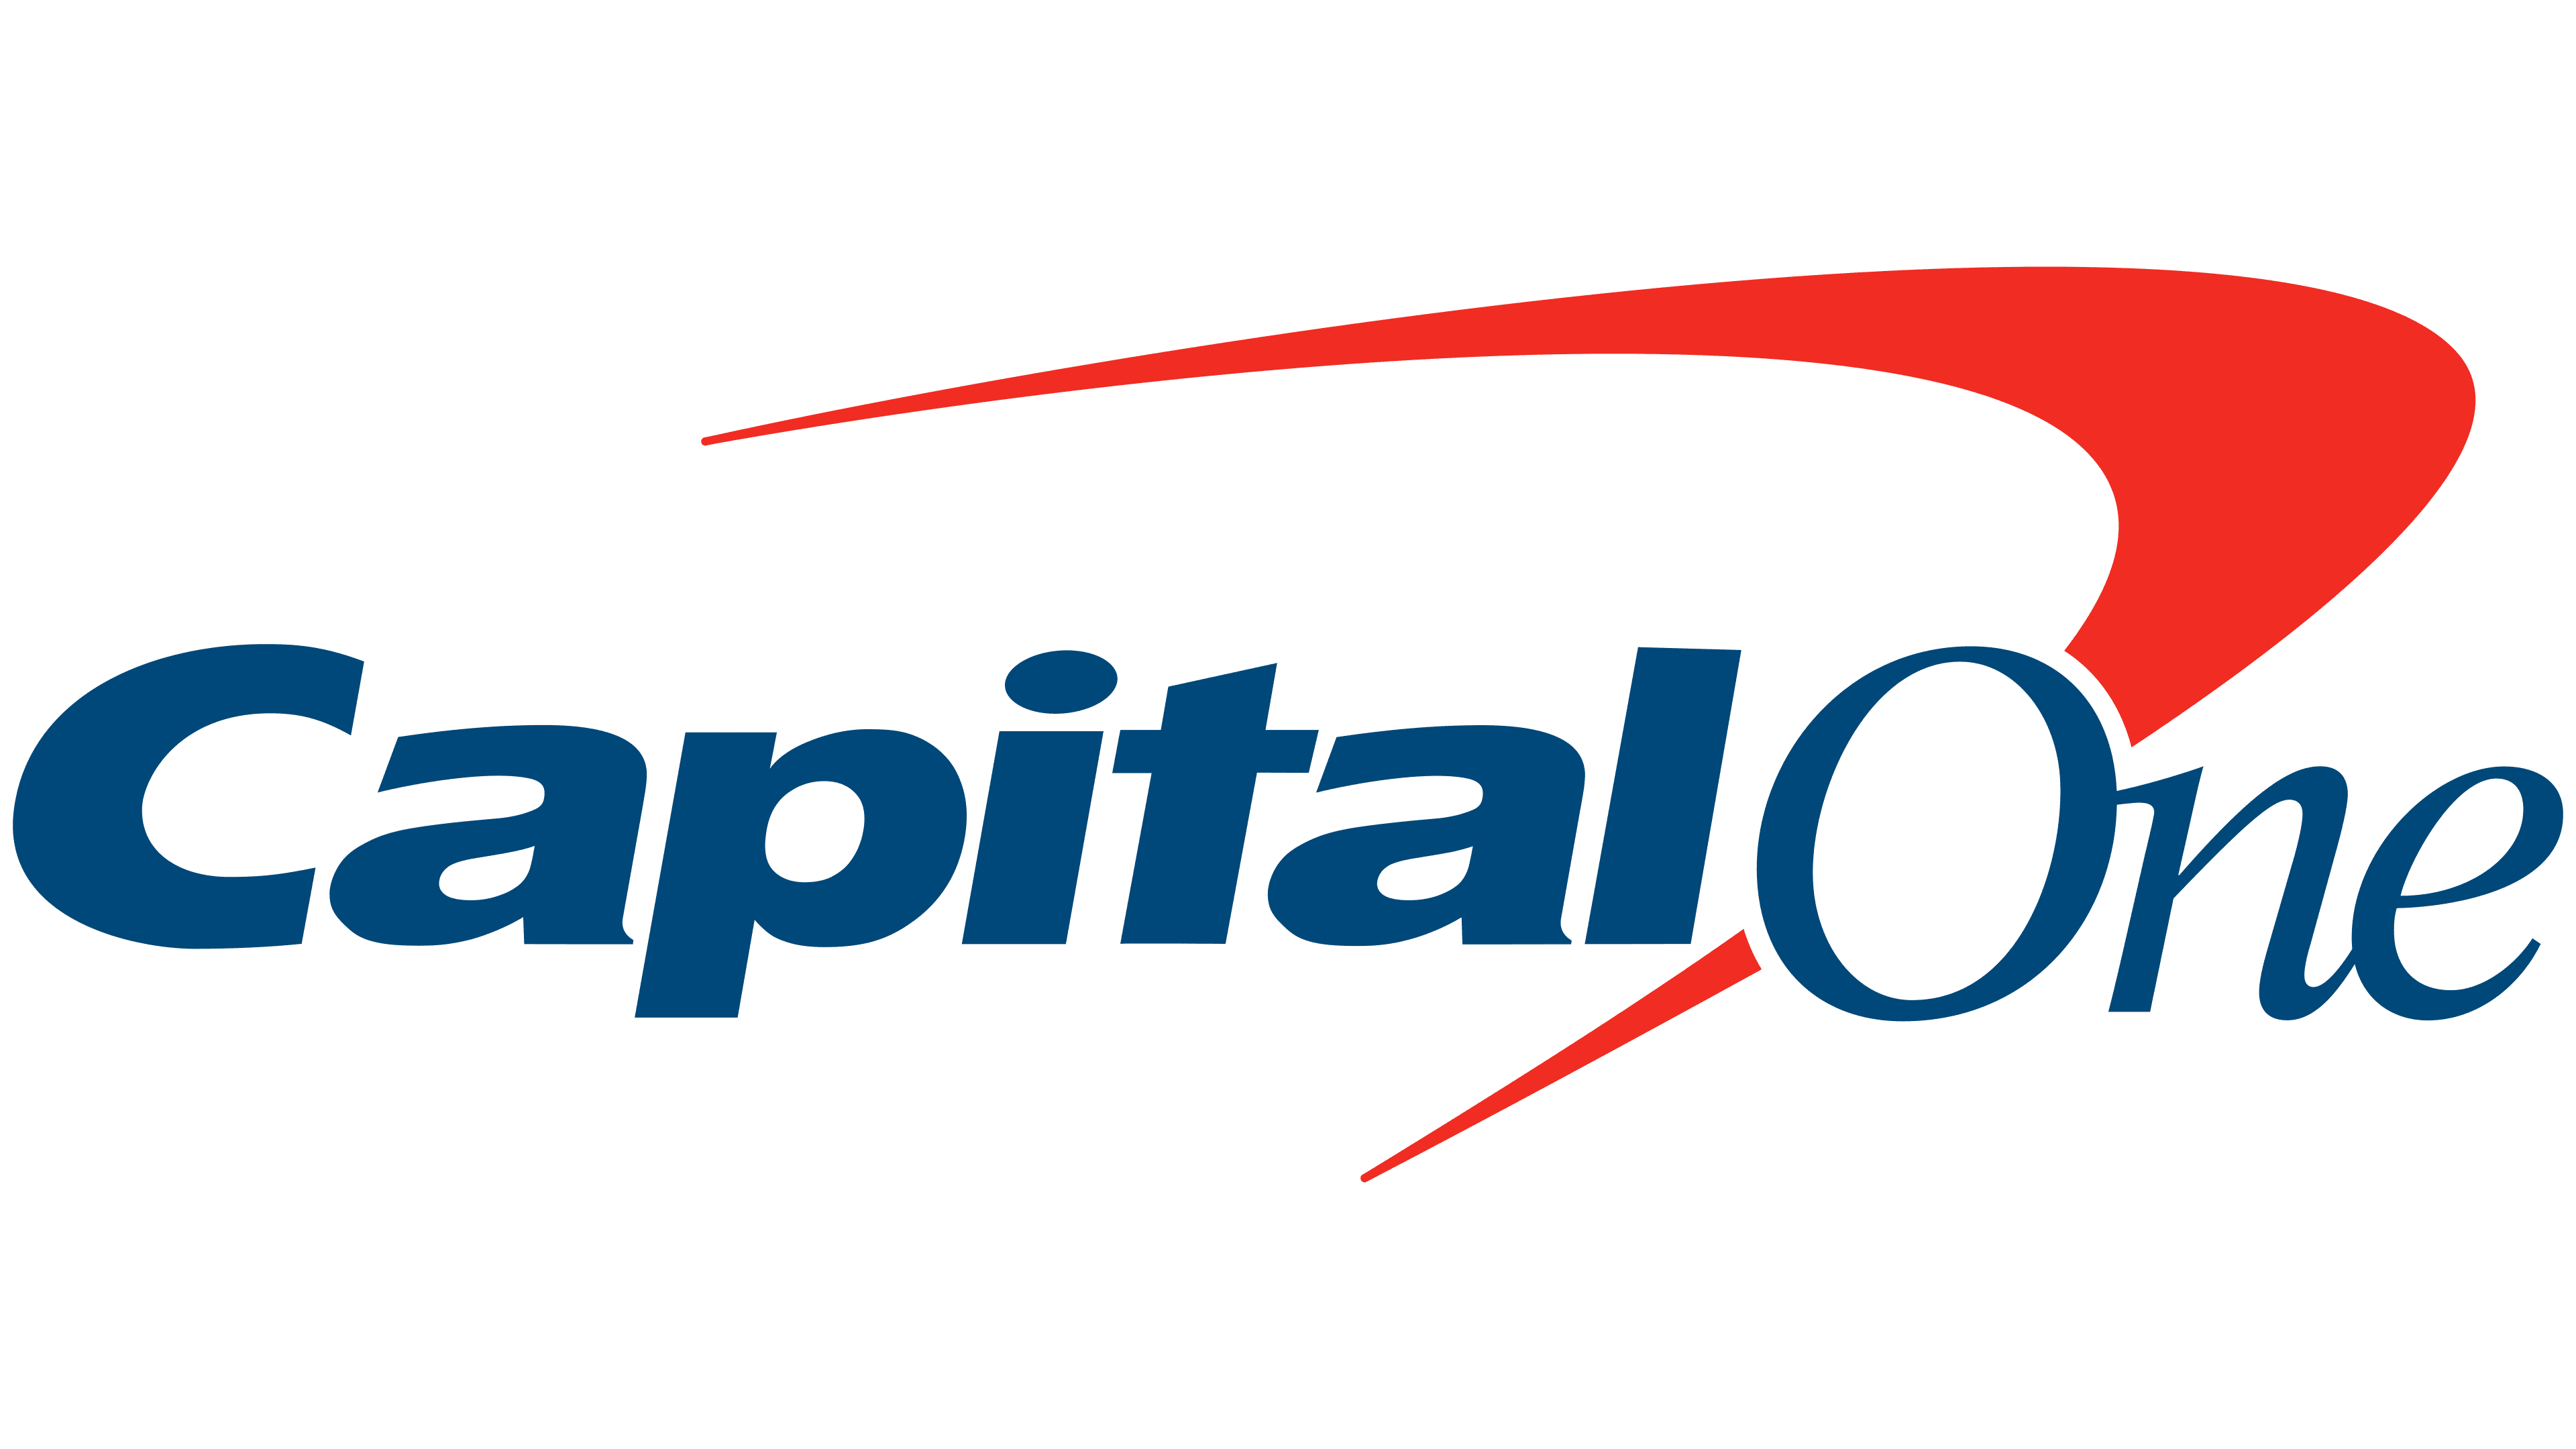  2023/04/Capital-One-Logo.png 